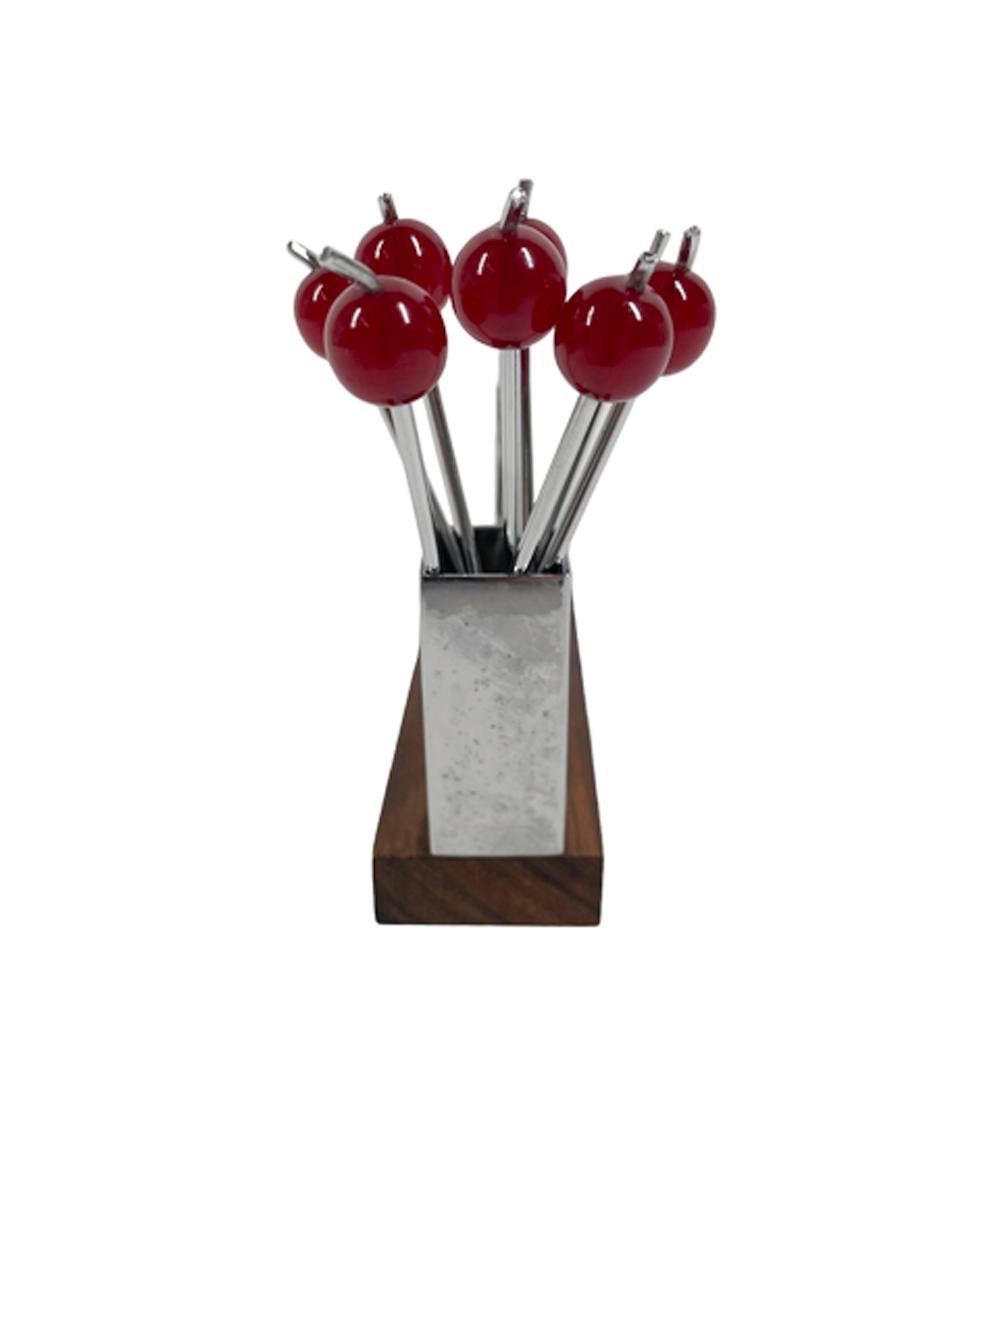 Art Deco Sudre Type Cocktail Pick Set w/Ducks Walking Up an Incline for Berries In Good Condition For Sale In Chapel Hill, NC